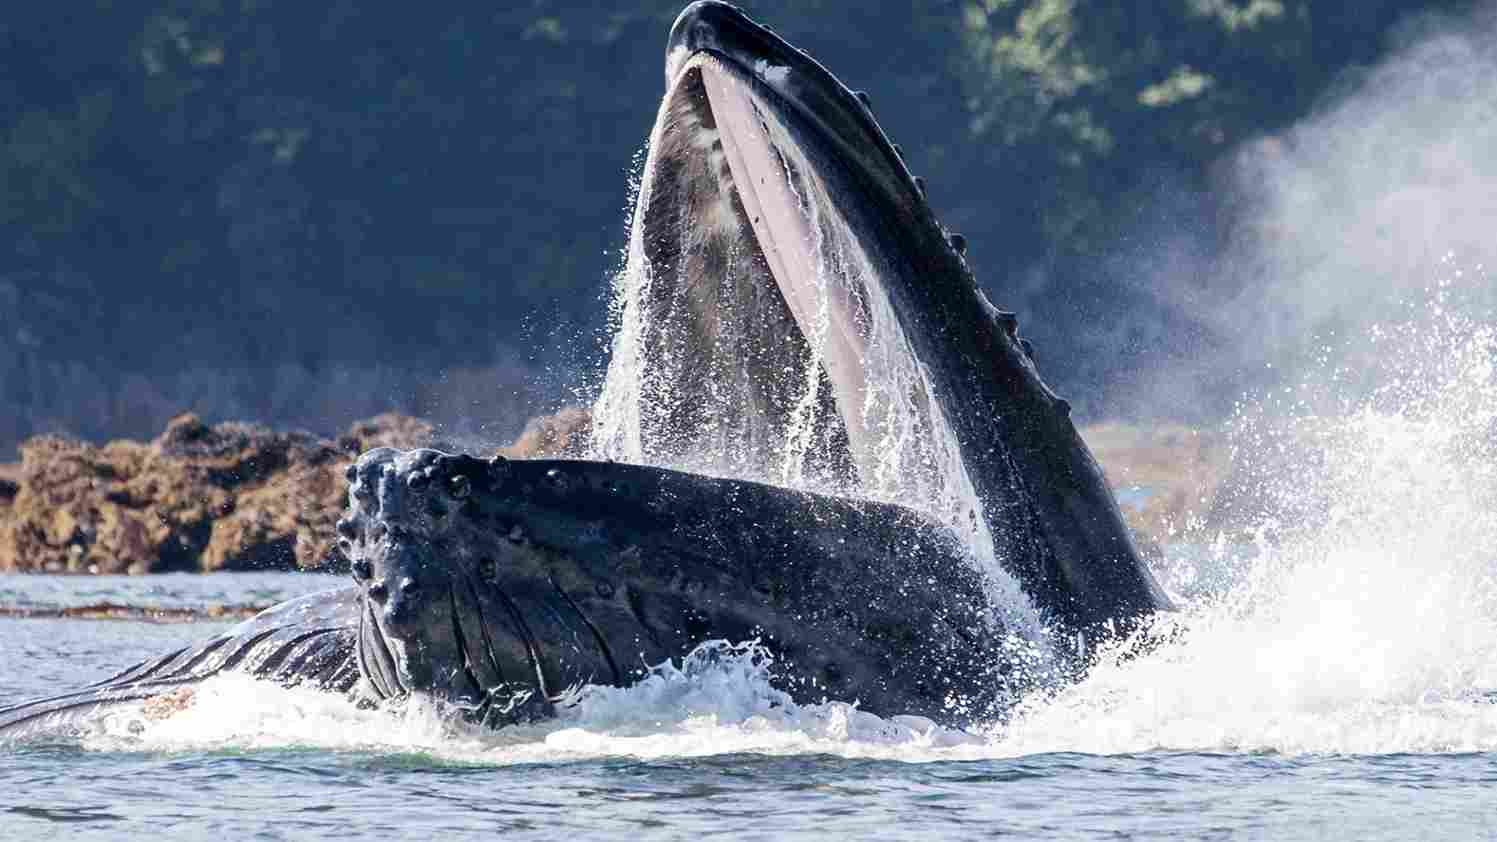 Whales in immediate need protection - Platform Tamil